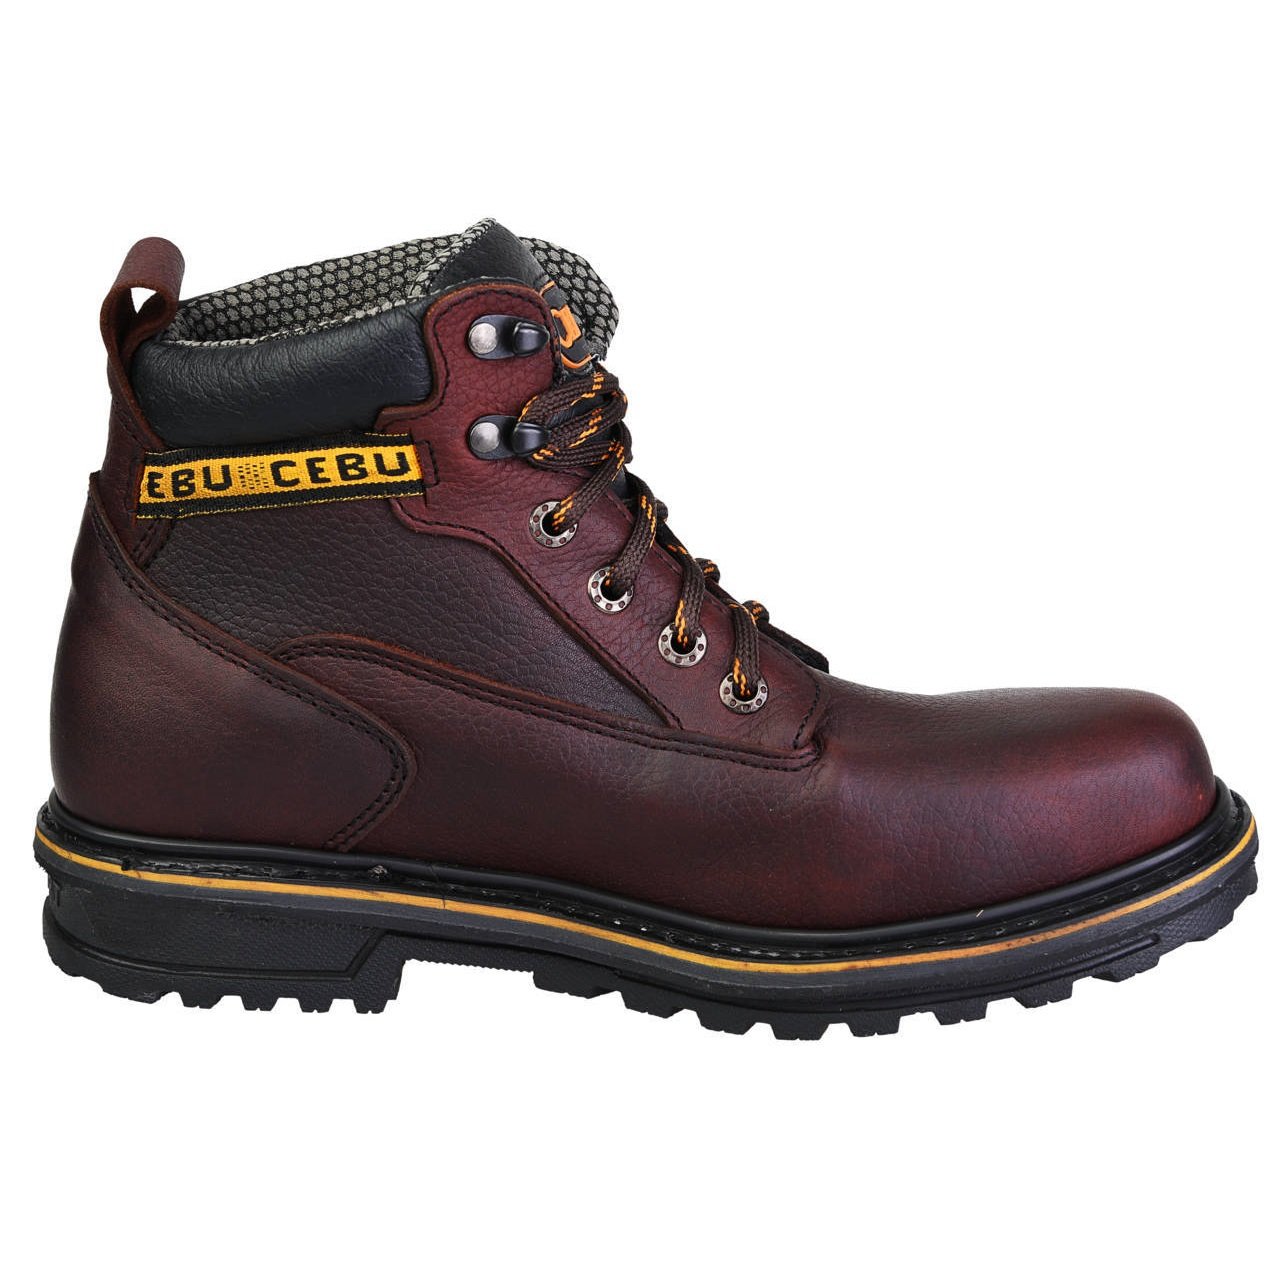 Men's Work Boots - Heavy Duty - Shedron Work Boots - Cebu - 6" Work Boots - Shedron 6in Work Boots